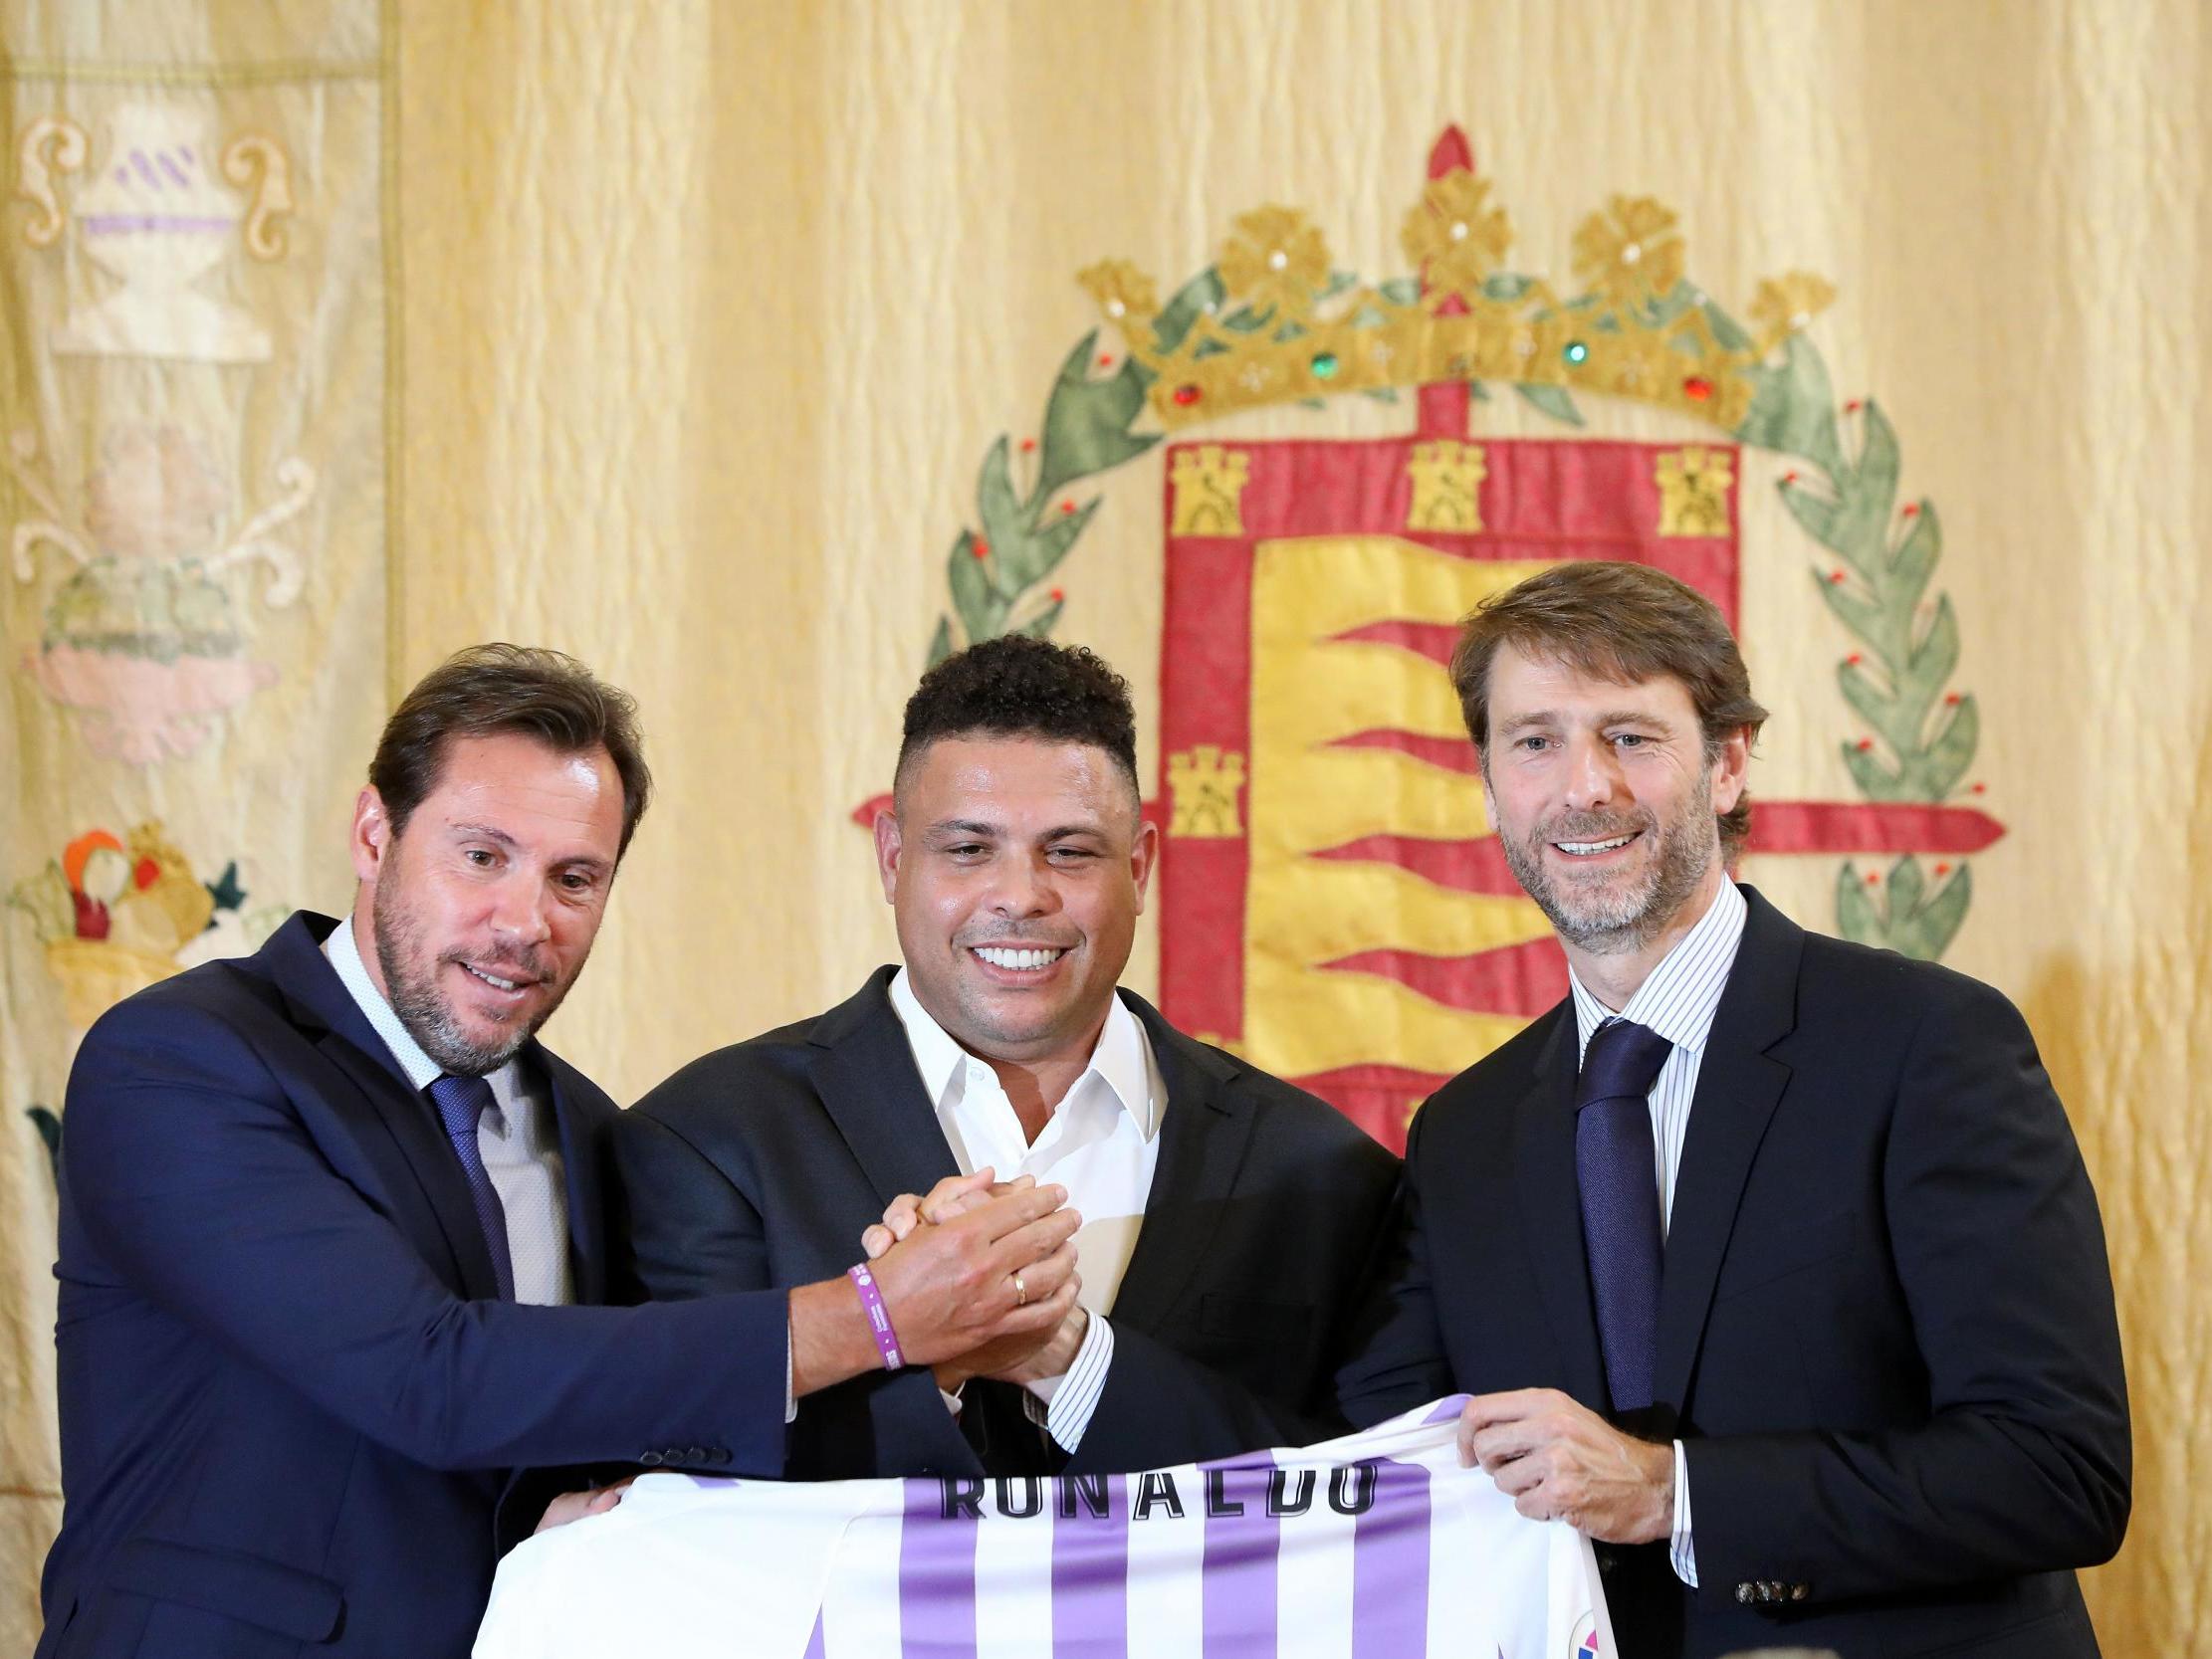 'We want Real Valladolid to consolidate in the top flight and keep building hopes from there,' Ronaldo said at his press conference